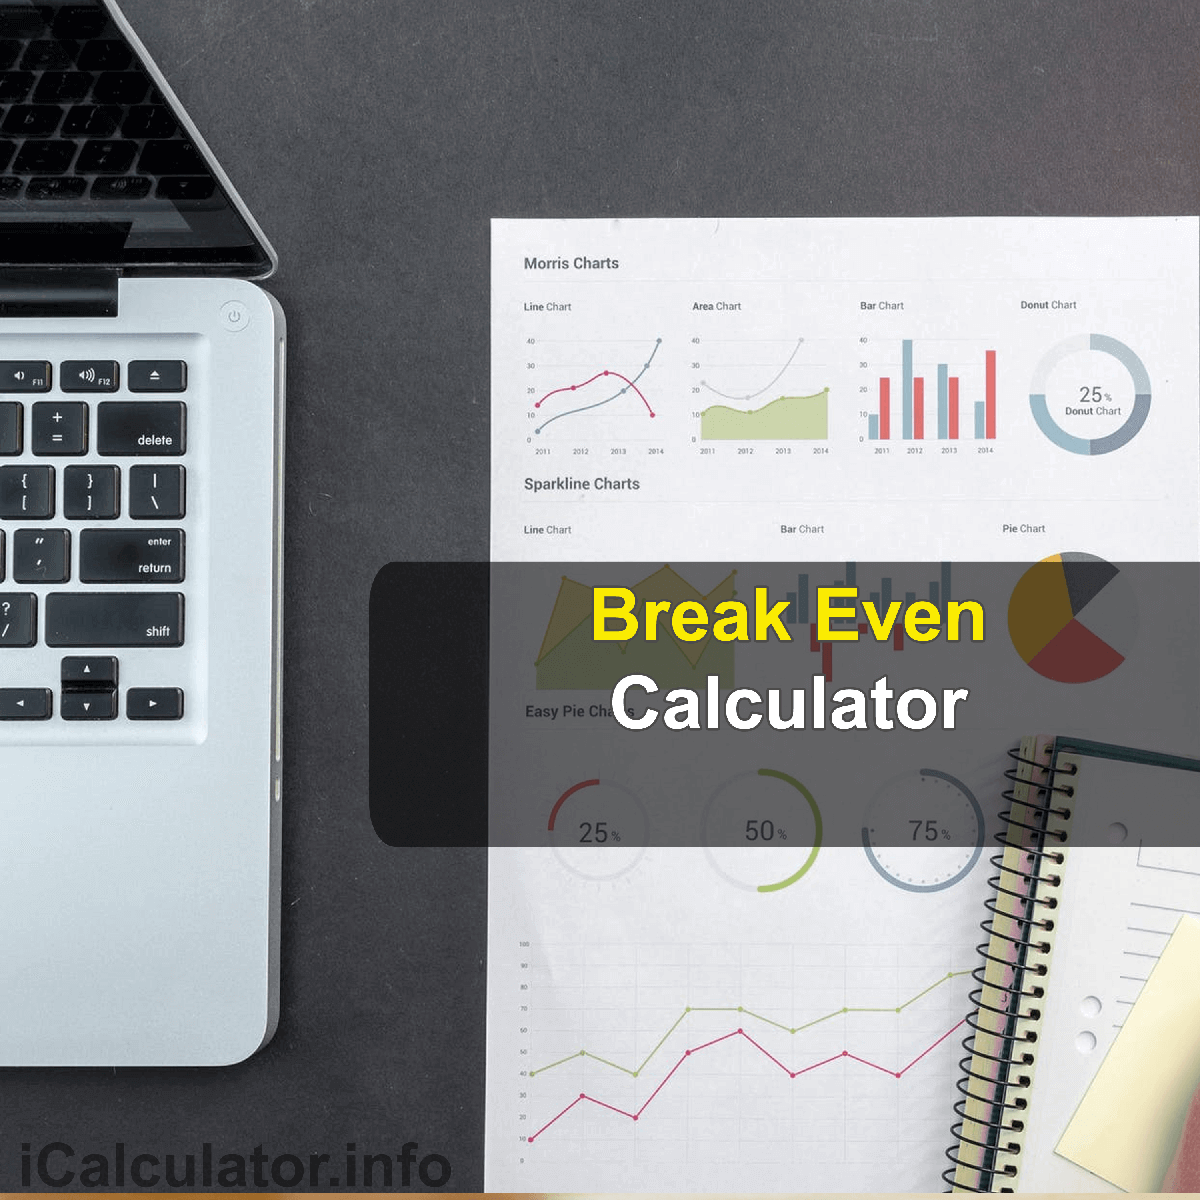 Break Even Calculator. This image provides details of how to calculate the break even point using a calculator and notepad. By using the break even point formula, the Break Even Calculator provides a true calculation of the point at which a business becomes profitable.